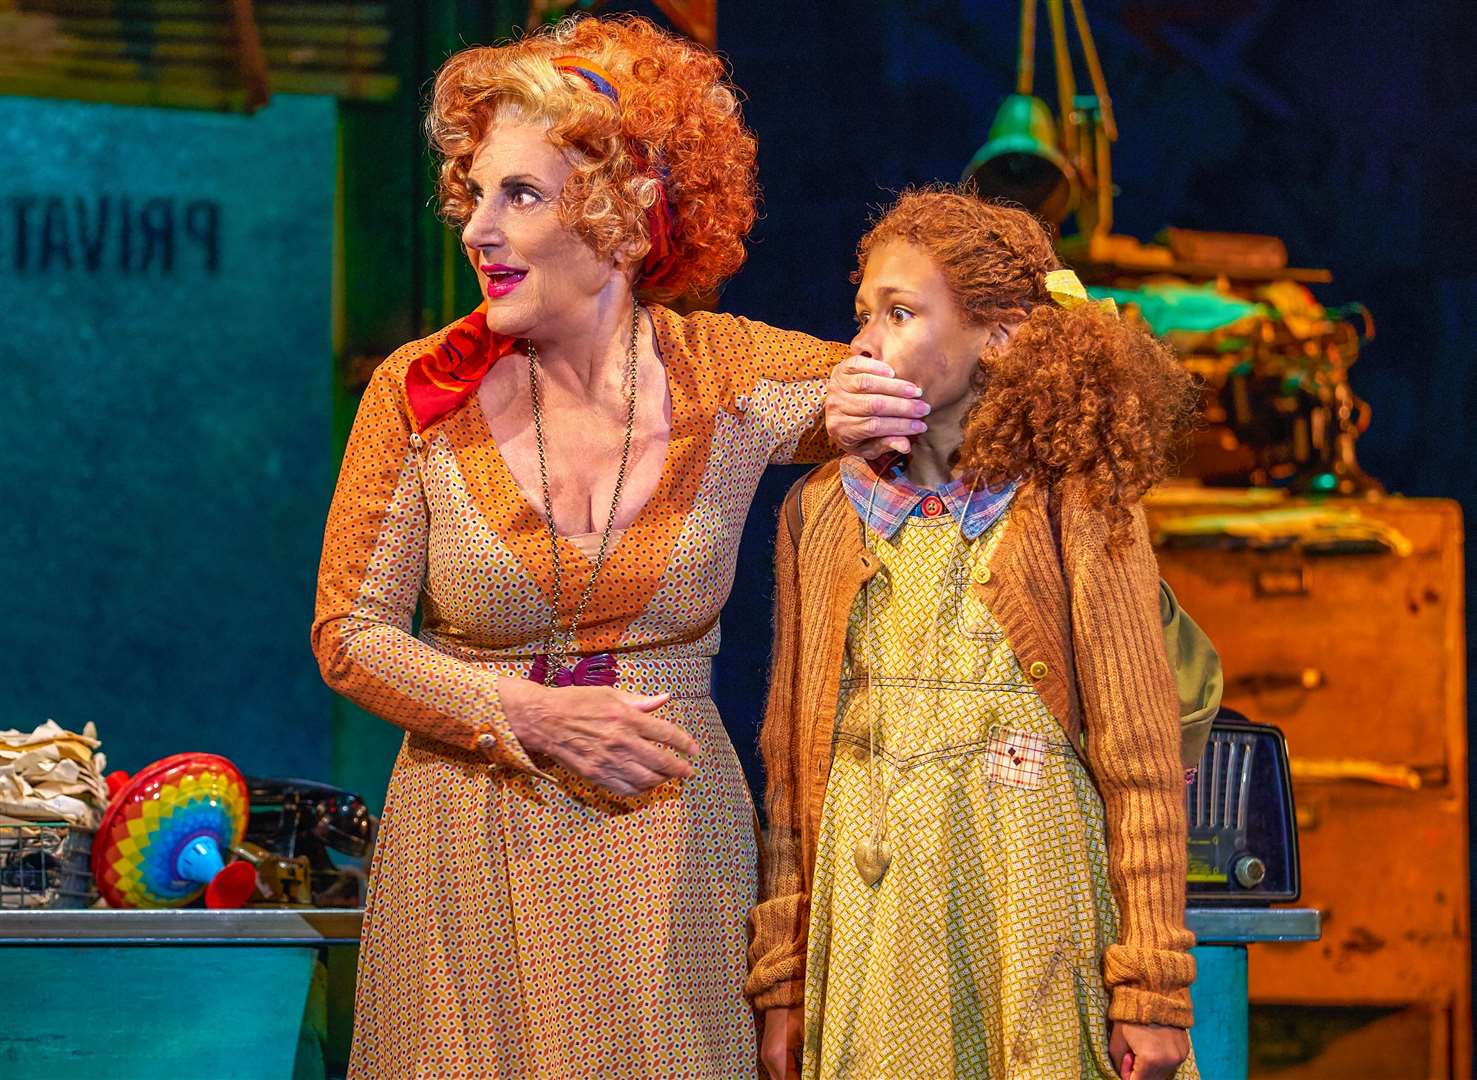 Annie the Musical at The Marlowe Theatre in Canterbury starring Birds